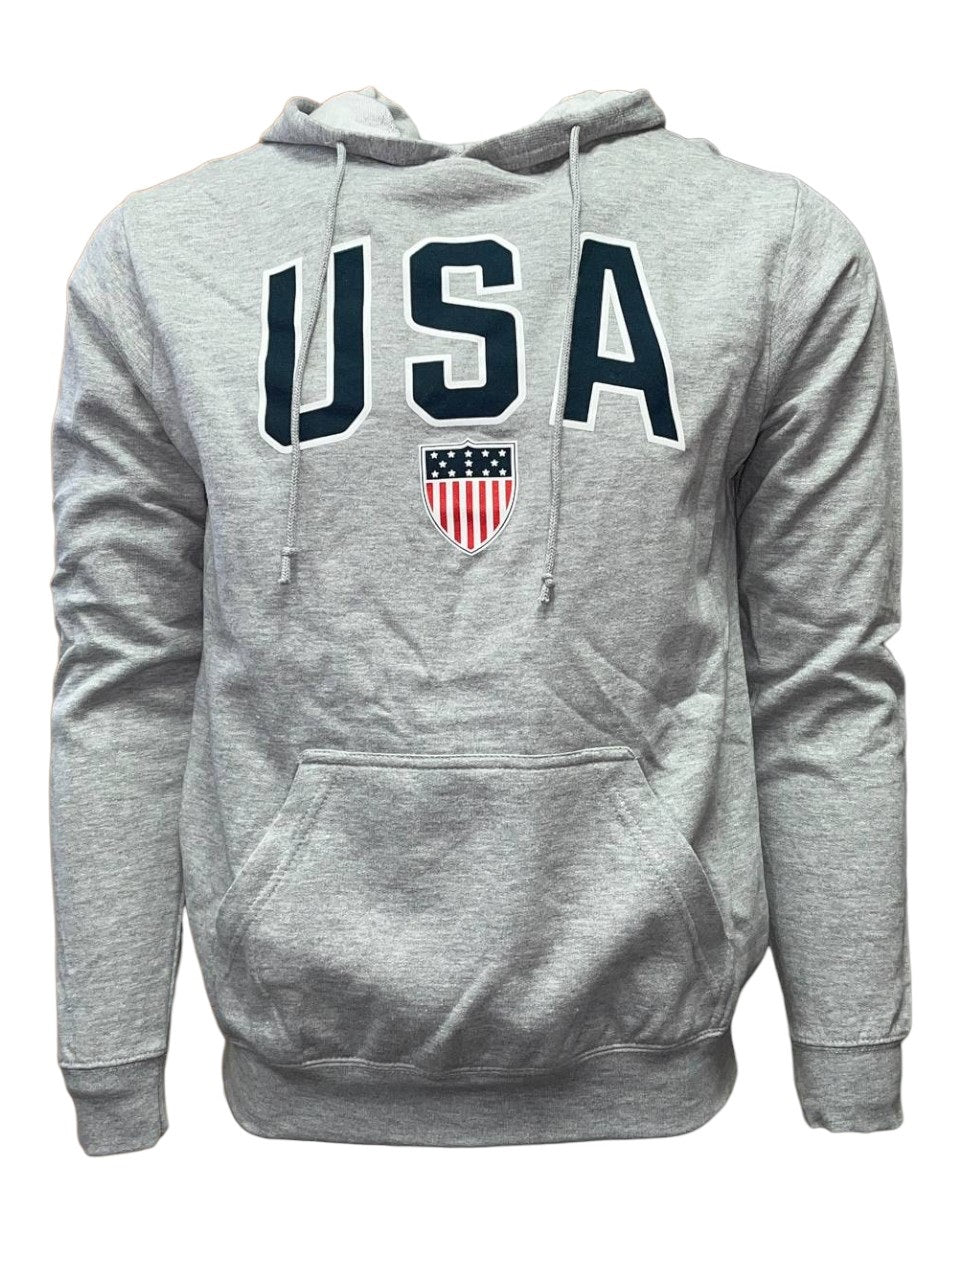 Team USA Pullover Hoodie